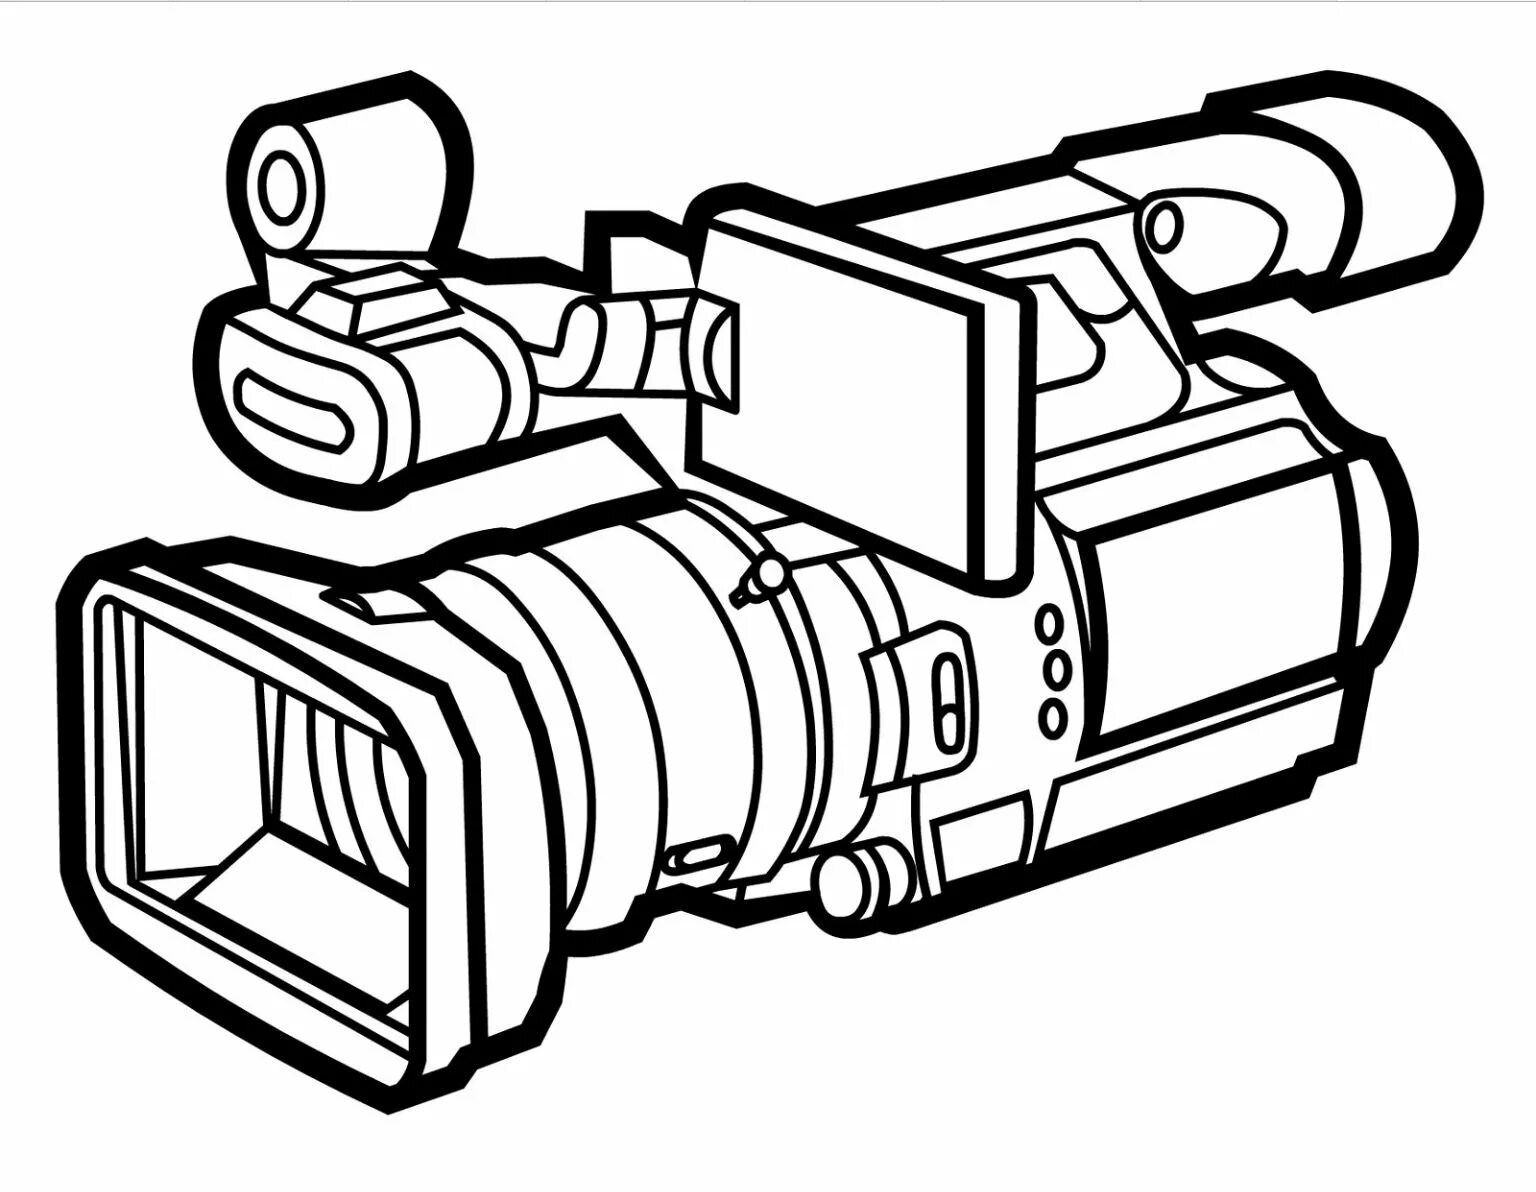 Coloring page amazing video camera